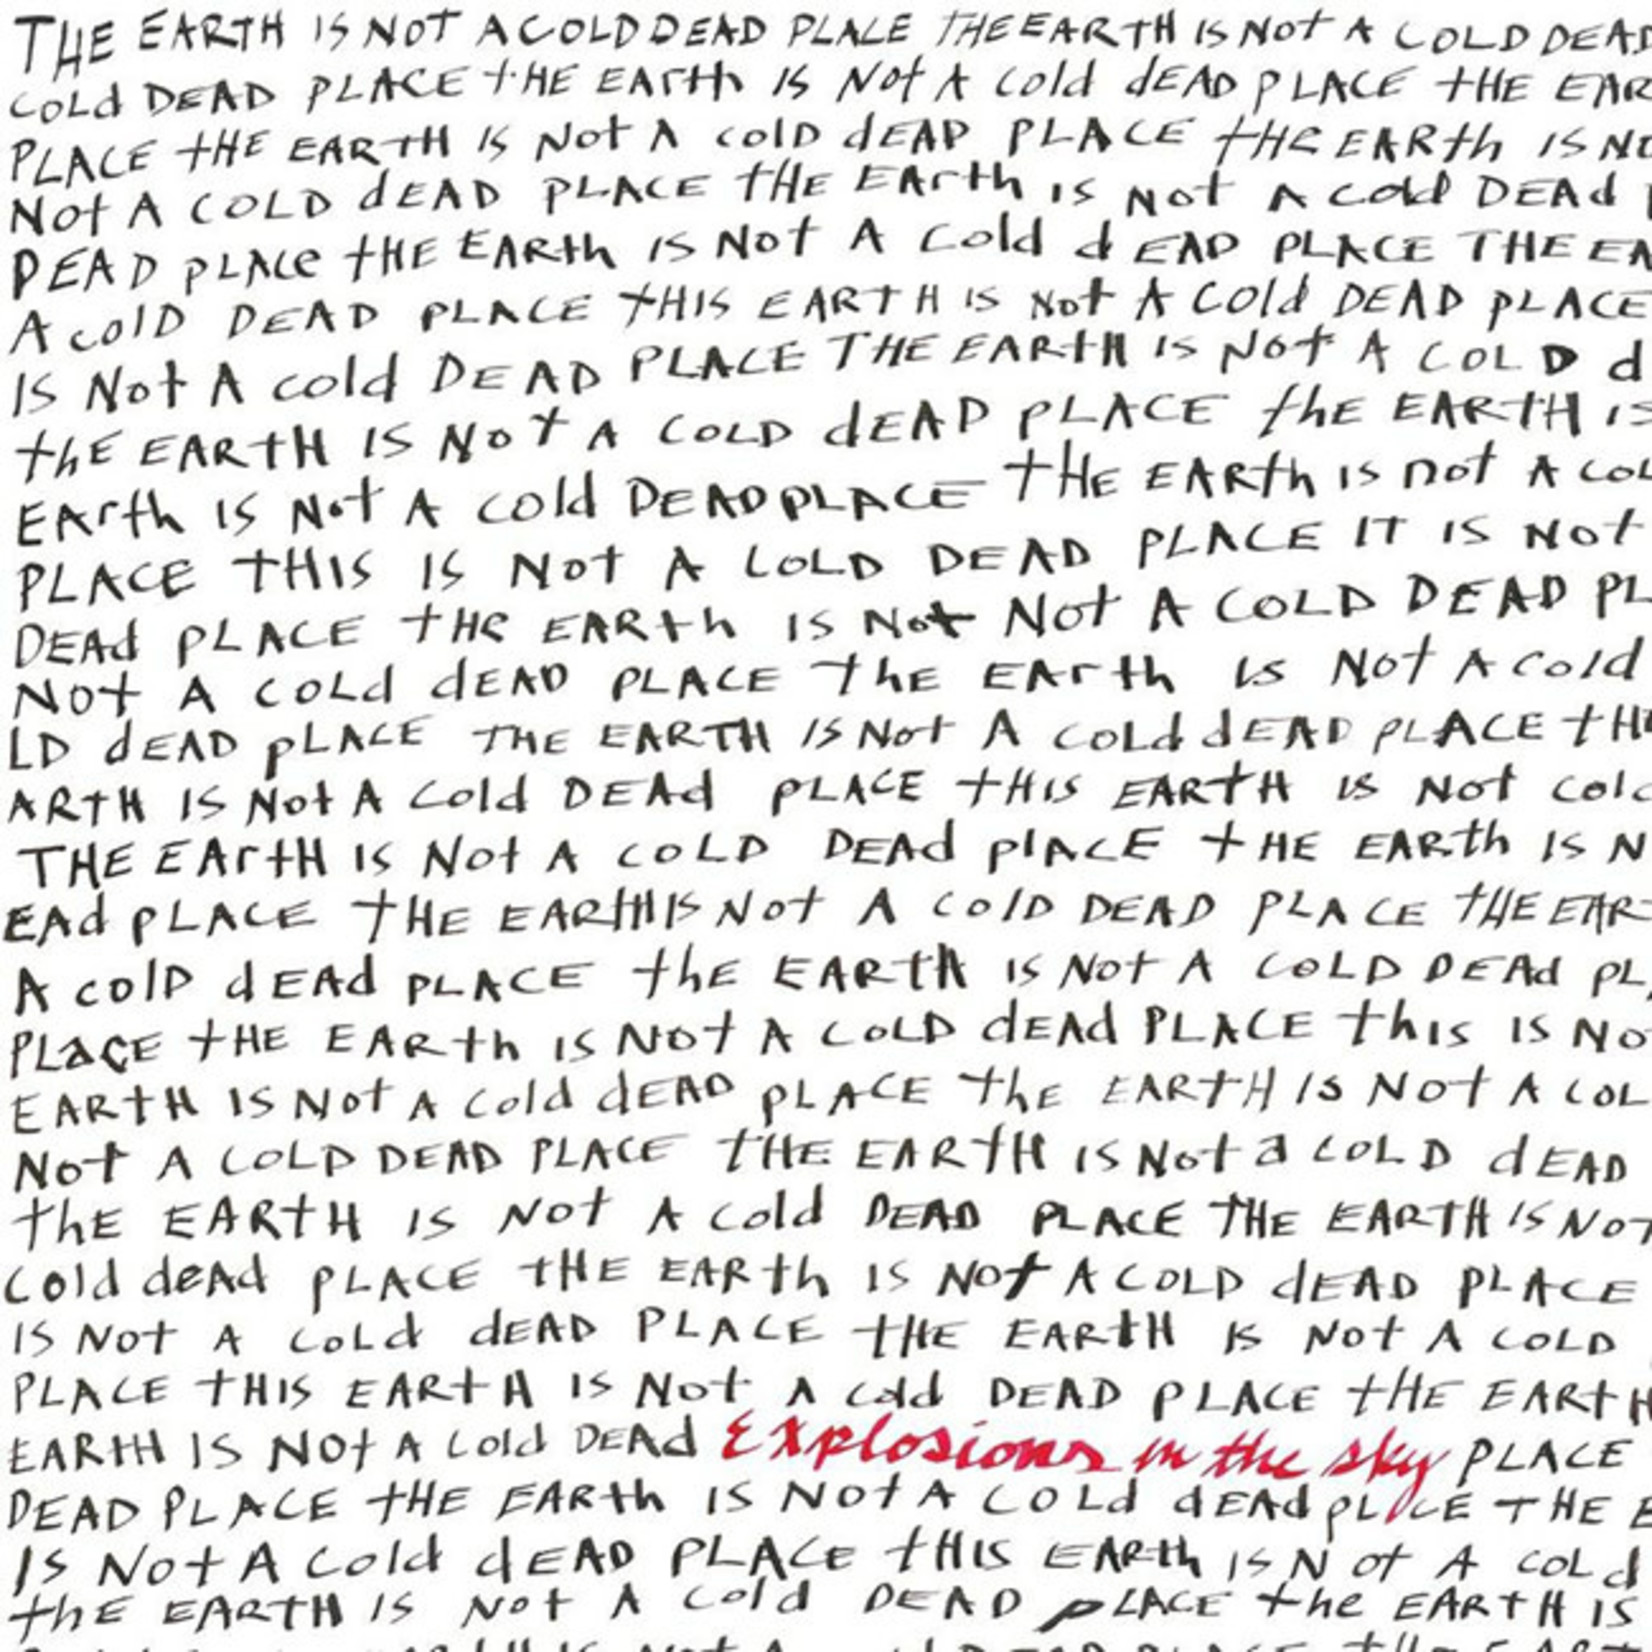 [New] Explosions in the Sky - The Earth is Not a Cold Dead Place (2LP)